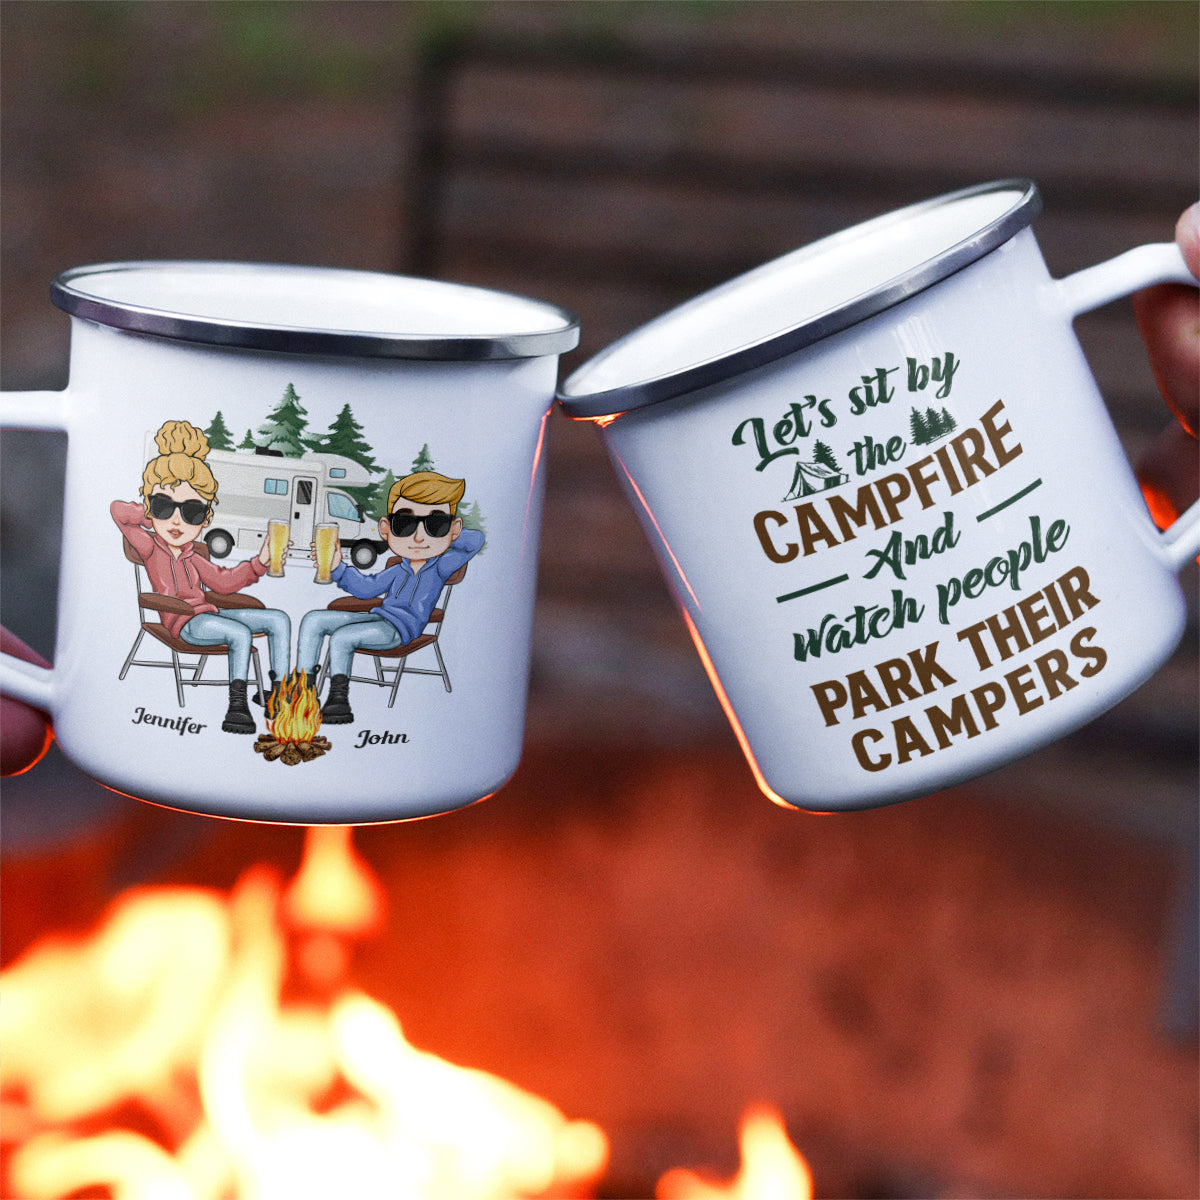 Making Memories One Campsite At A Time - Personalized Enamel Mug - Birthday Gift For Camping Friends